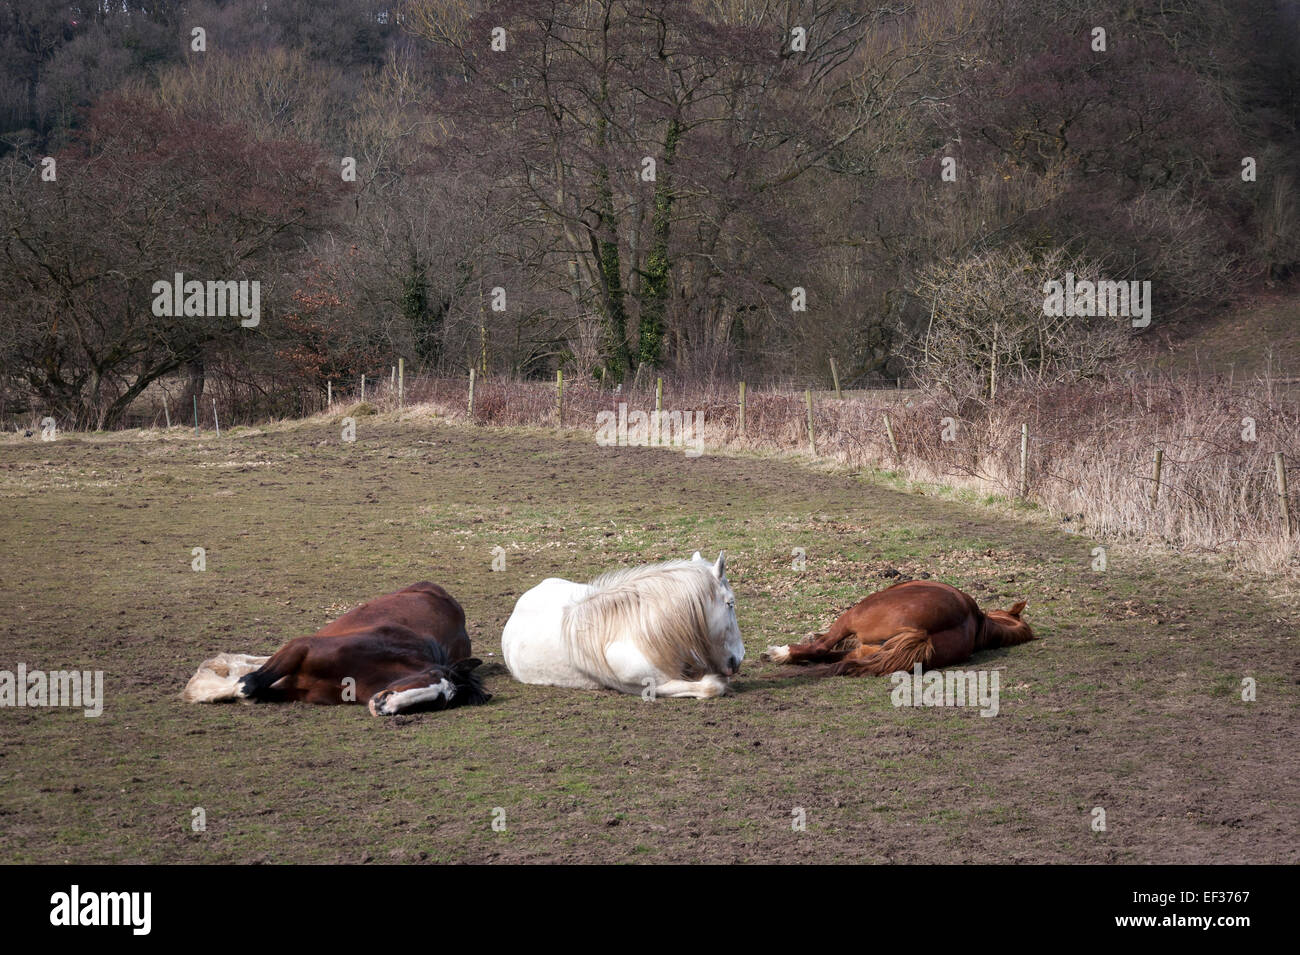 Three lazy horses lying in a field in late winter/early spring. Taken near the river Goyt in Cheshire, England. Stock Photo